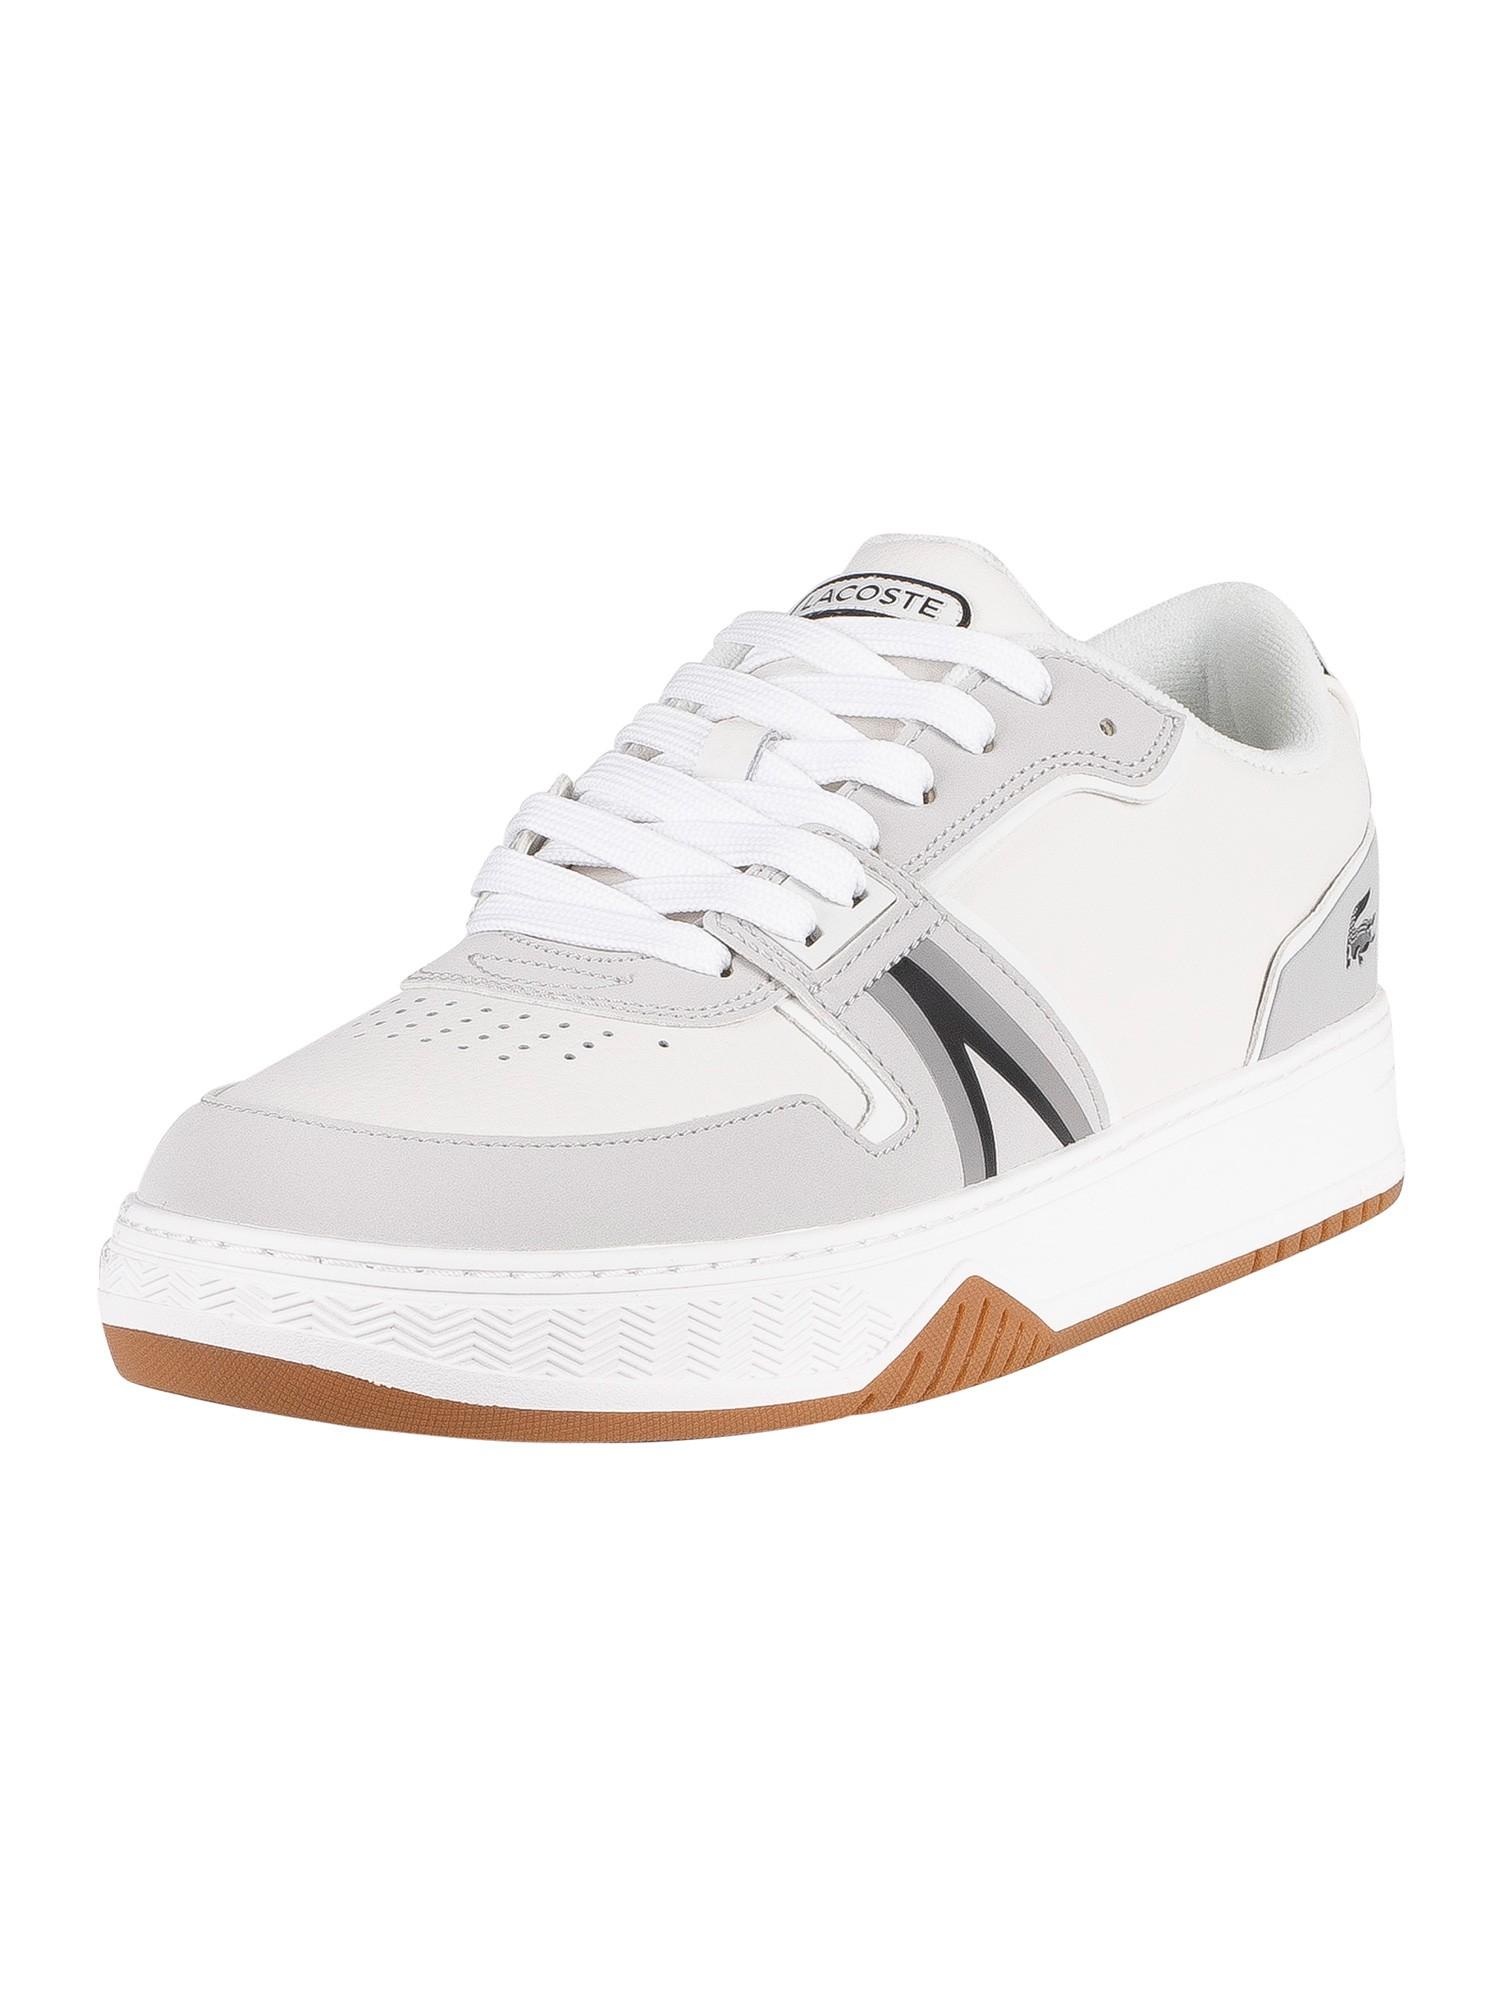 Lacoste L001 0722 2 Sma Leather Trainers in White for Men | Lyst